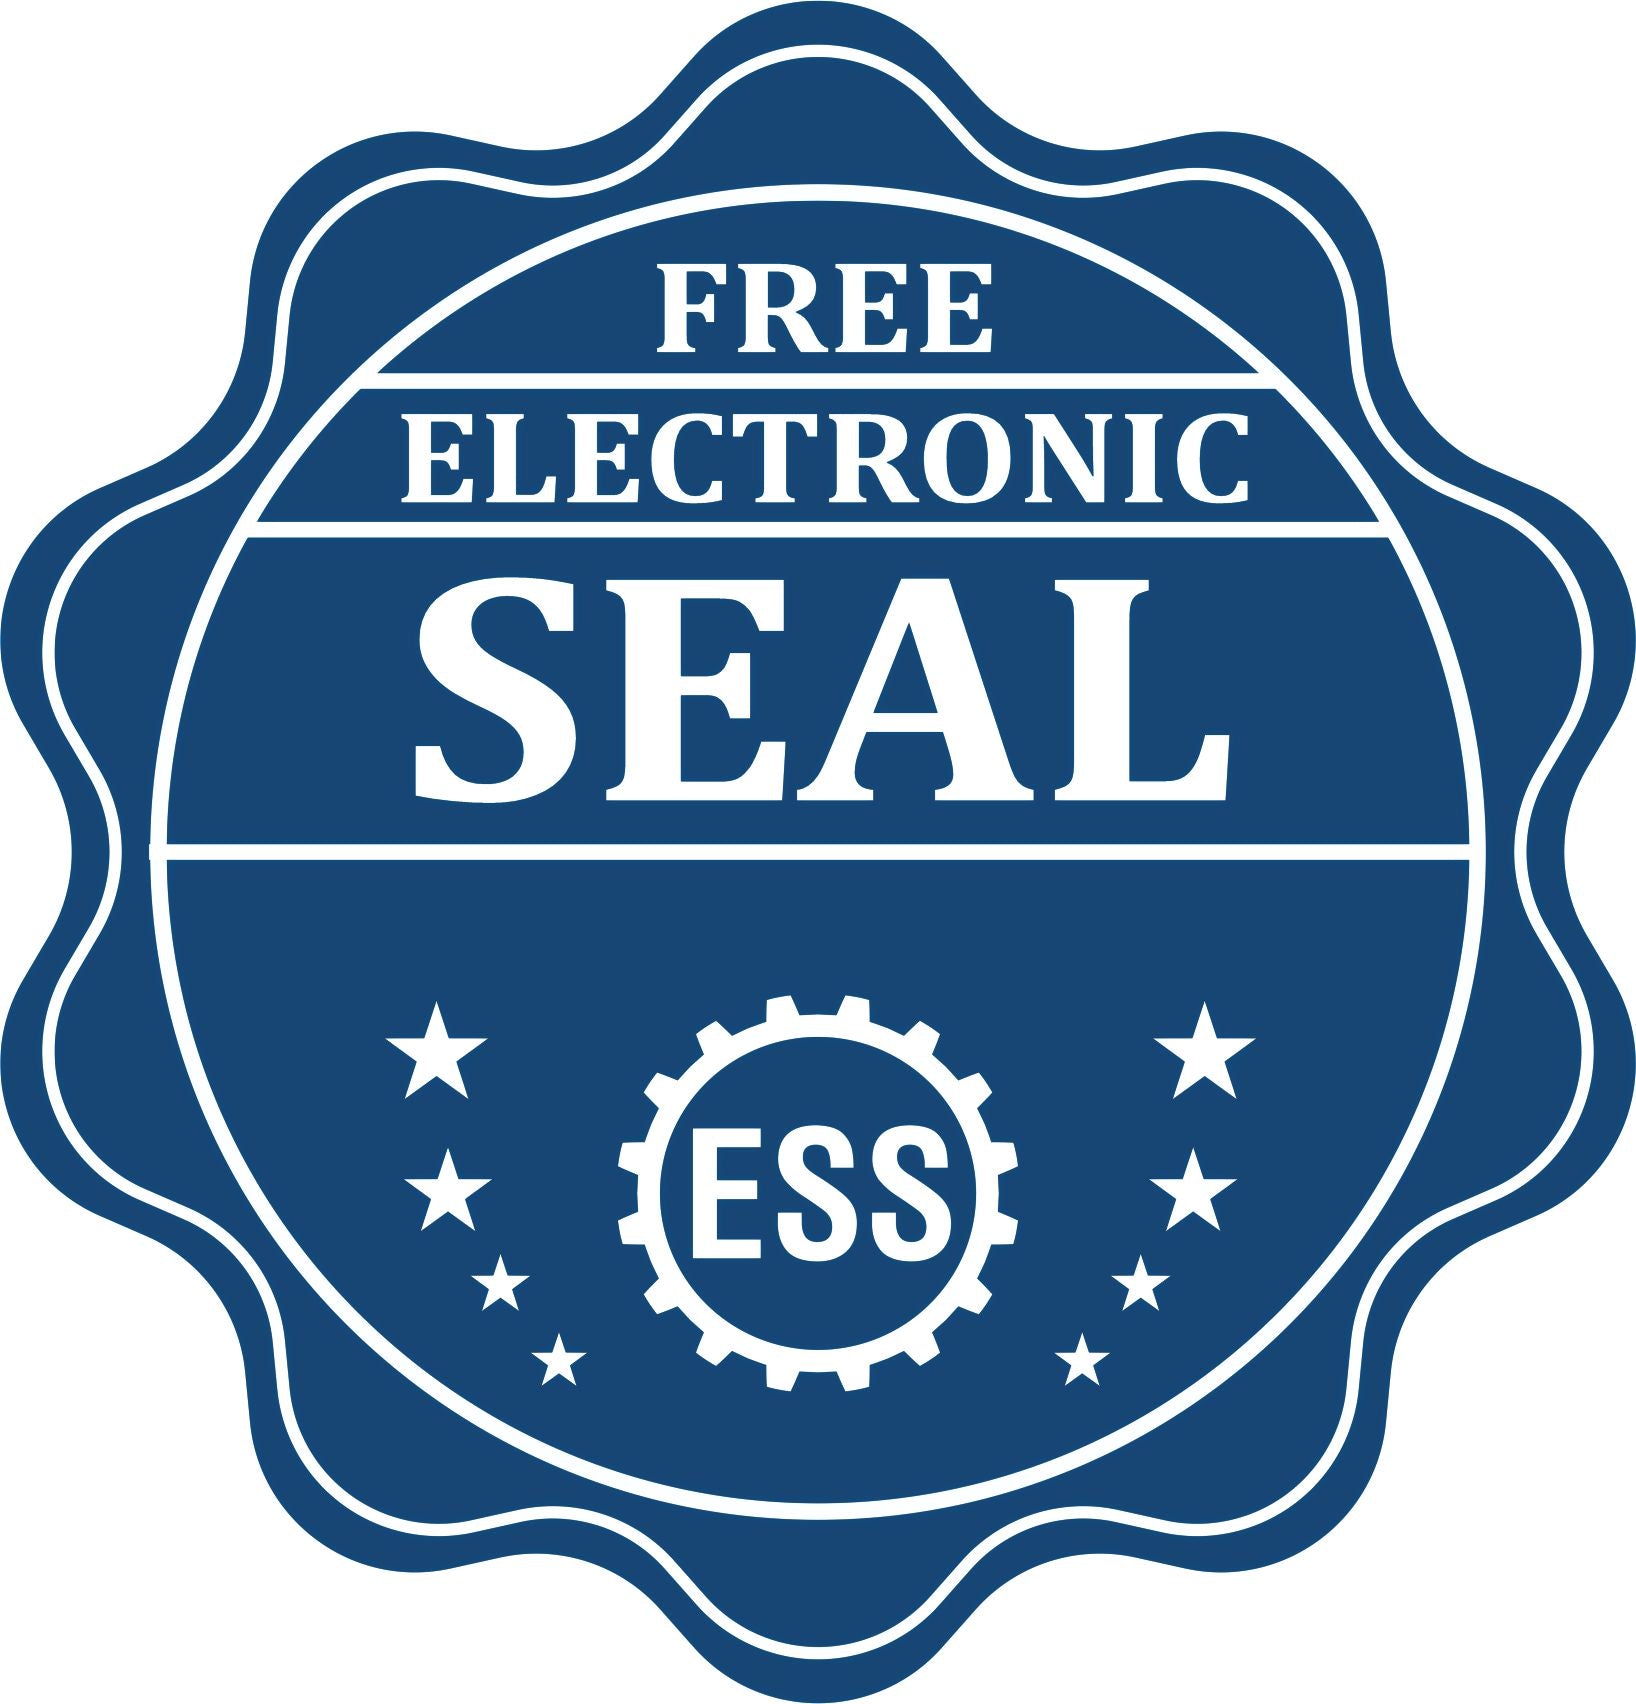 A badge showing a free electronic seal for the Long Reach Iowa Land Surveyor Seal with stars and the ESS gear on the emblem.